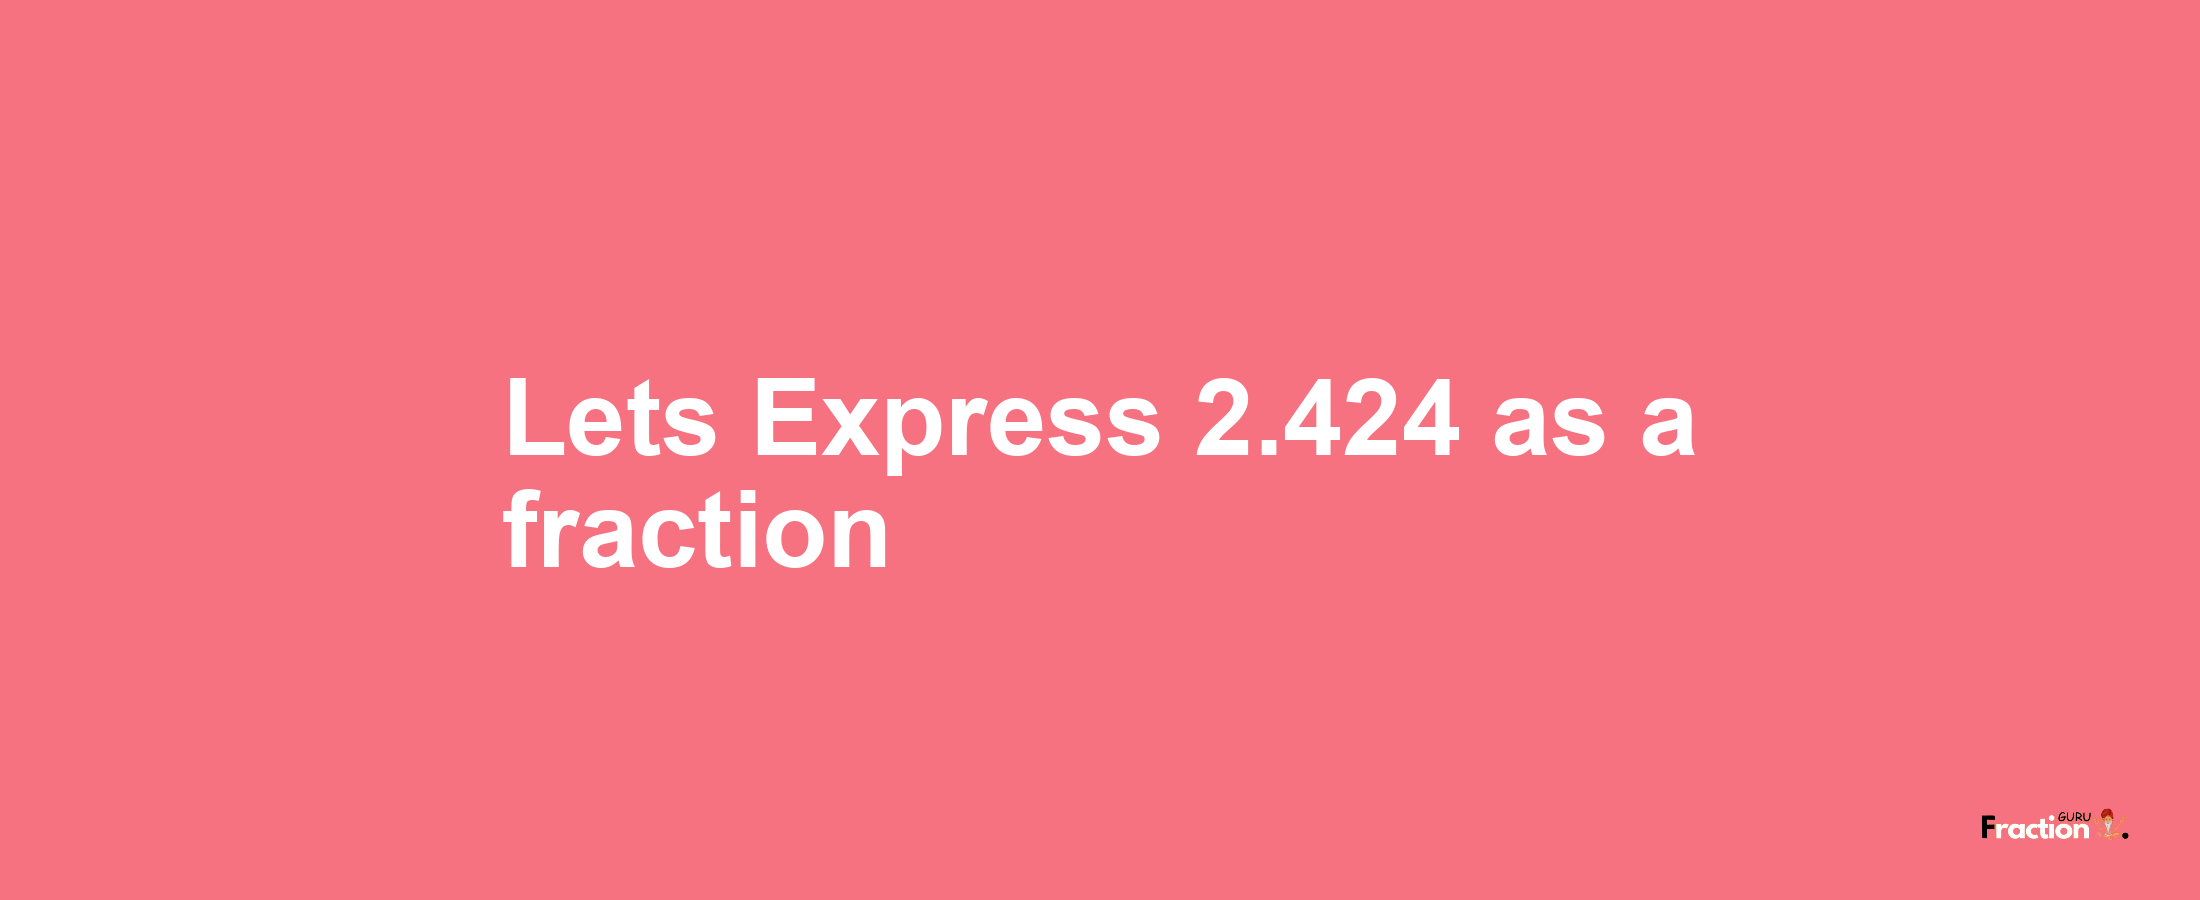 Lets Express 2.424 as afraction